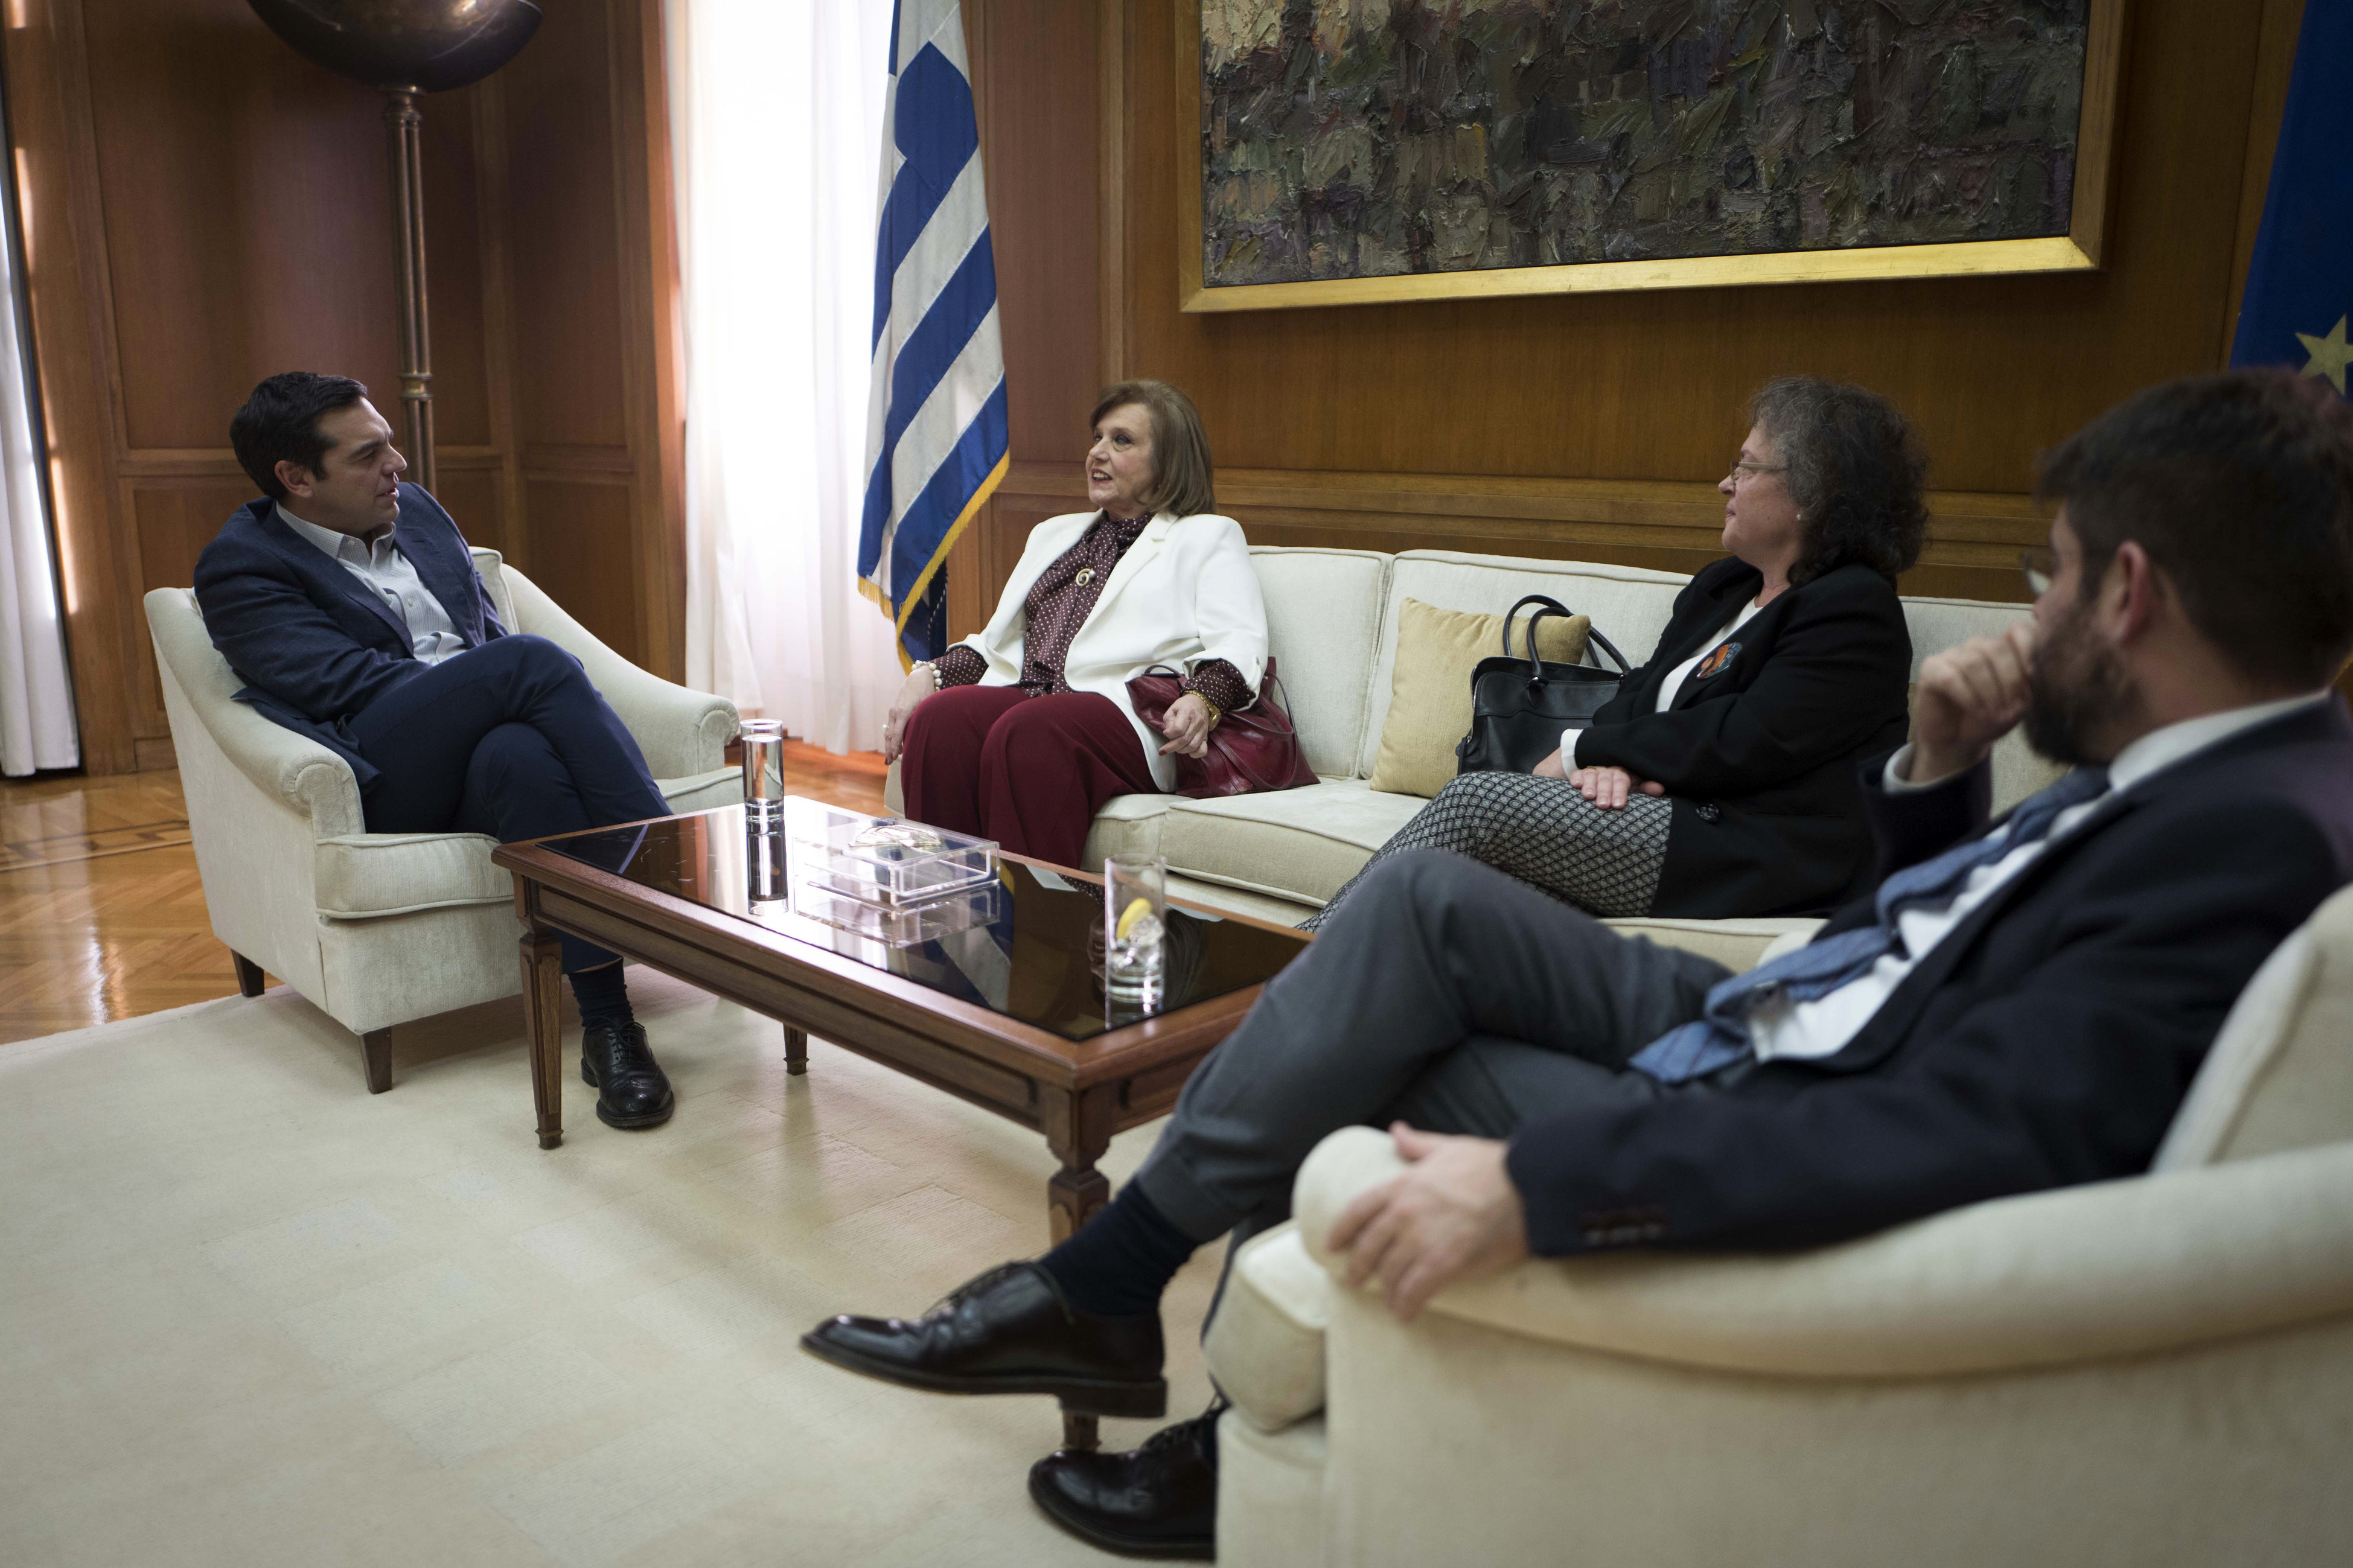 Tsipras seeking alliances with centrist forces, eyes Leventis’ MPs